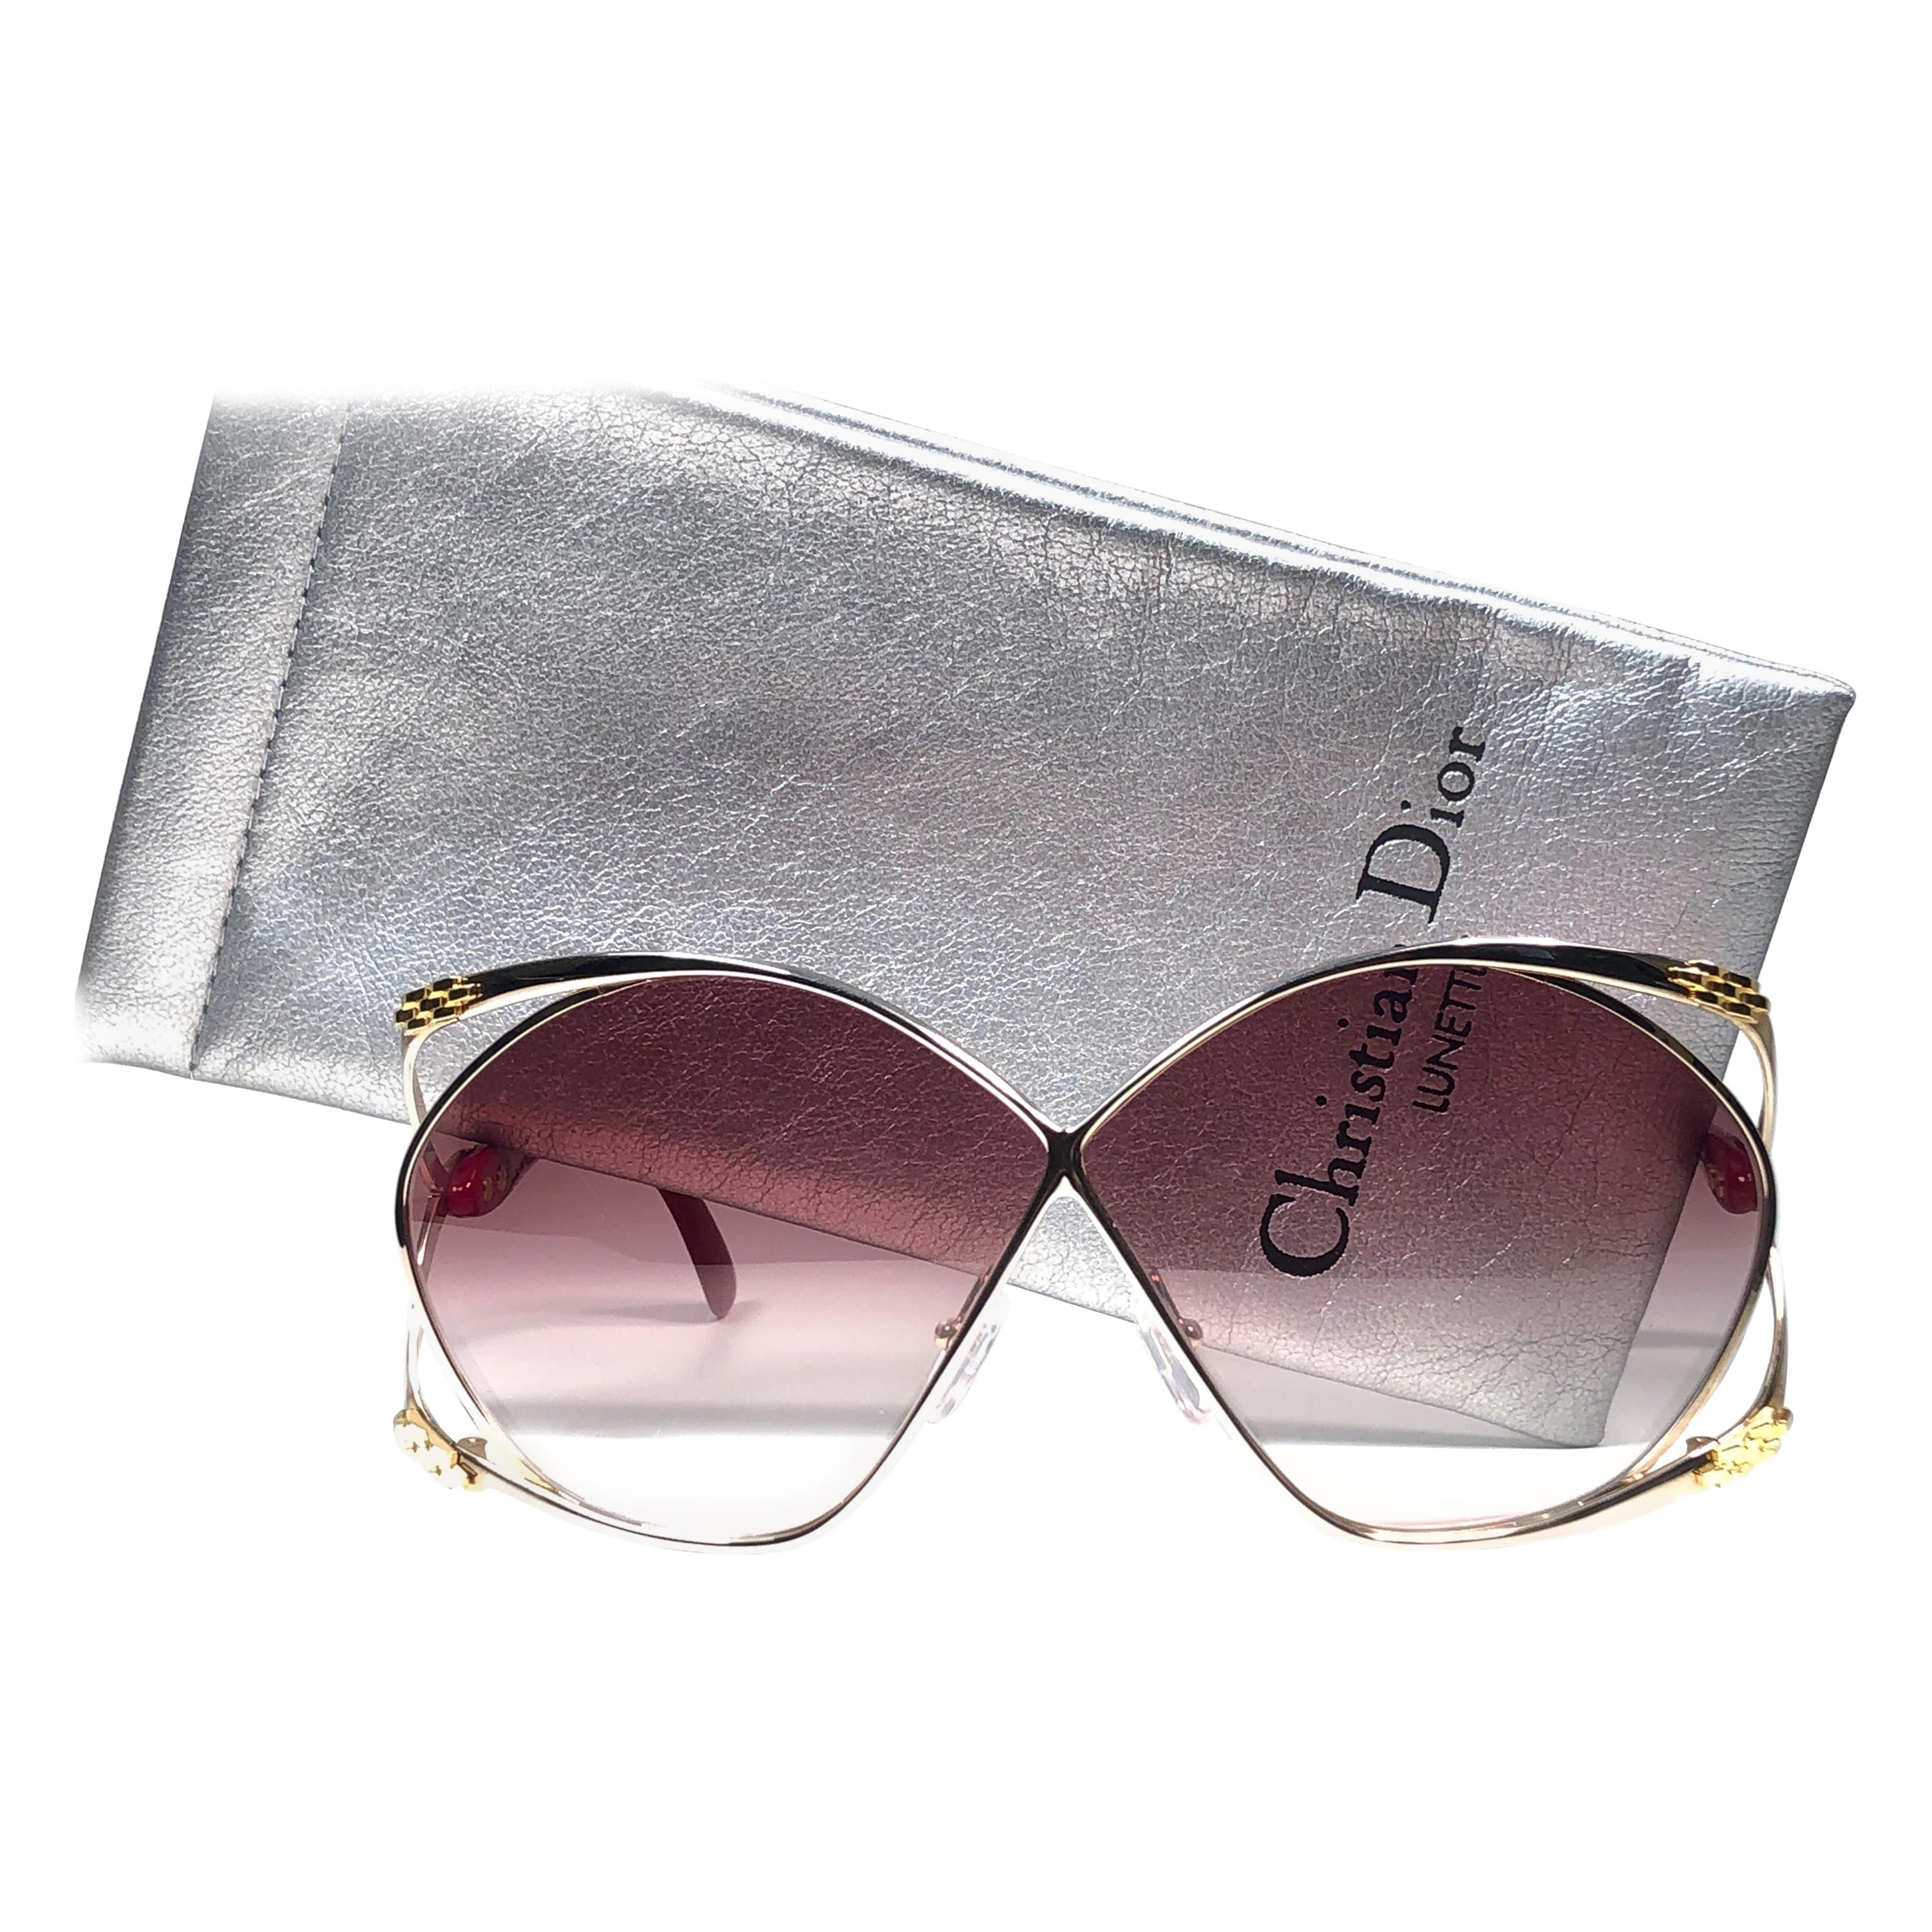 New Vintage Christian Dior 2056 45 Butterfly Gold & Red Sunglasses 